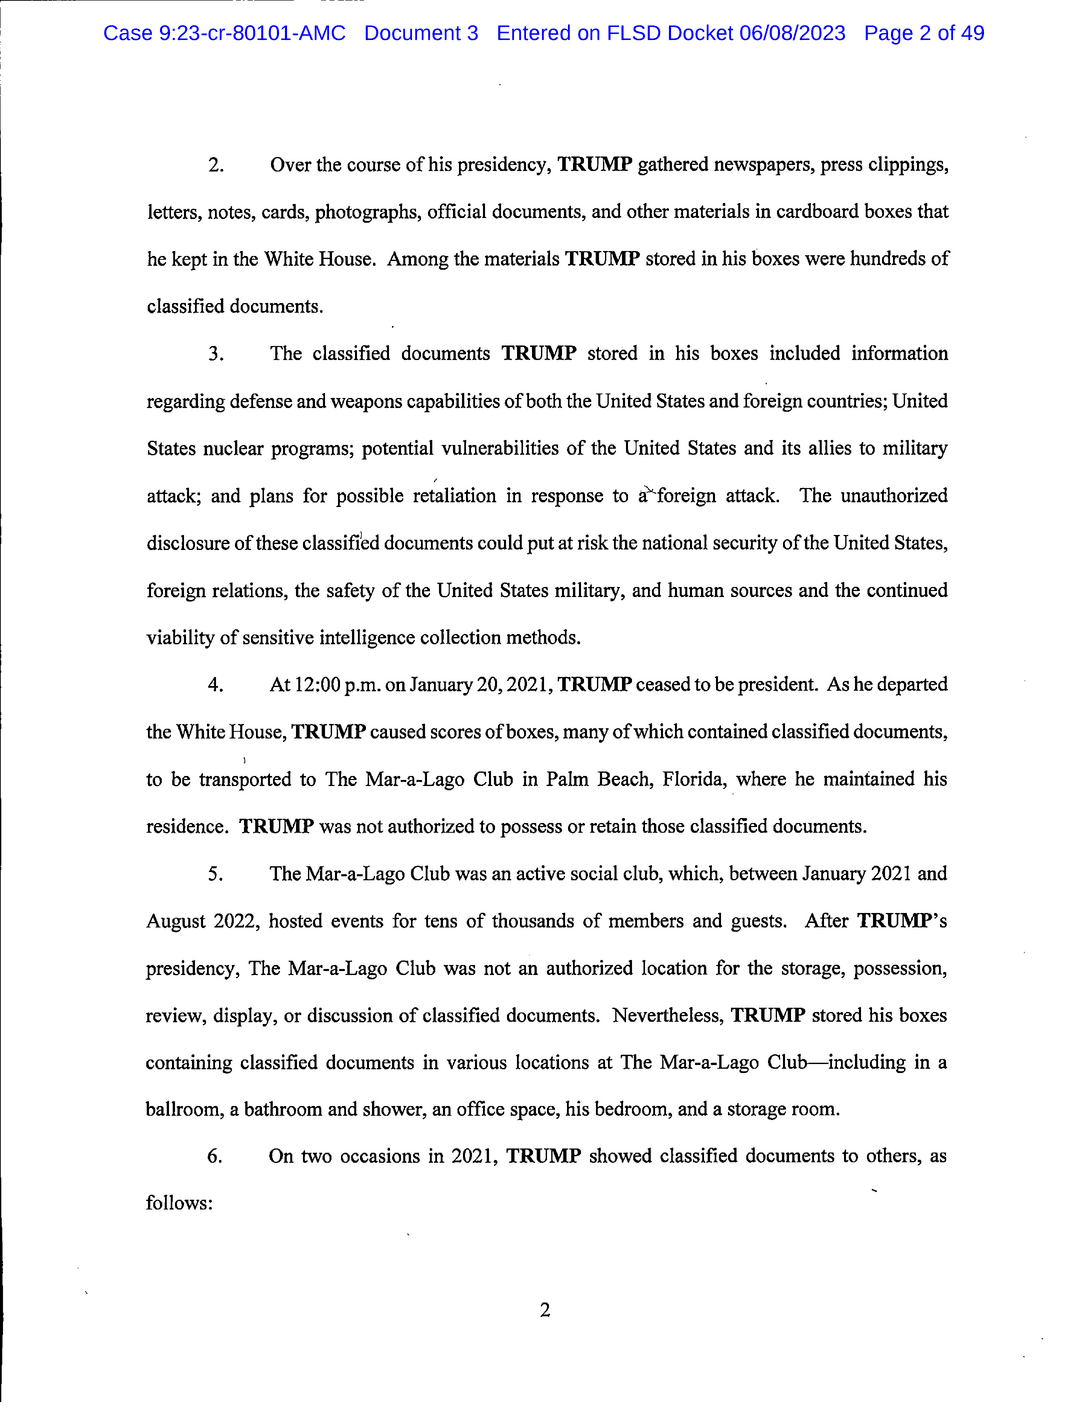 Page 2 of Donald Trump Classified Documents Indictment PDF document.